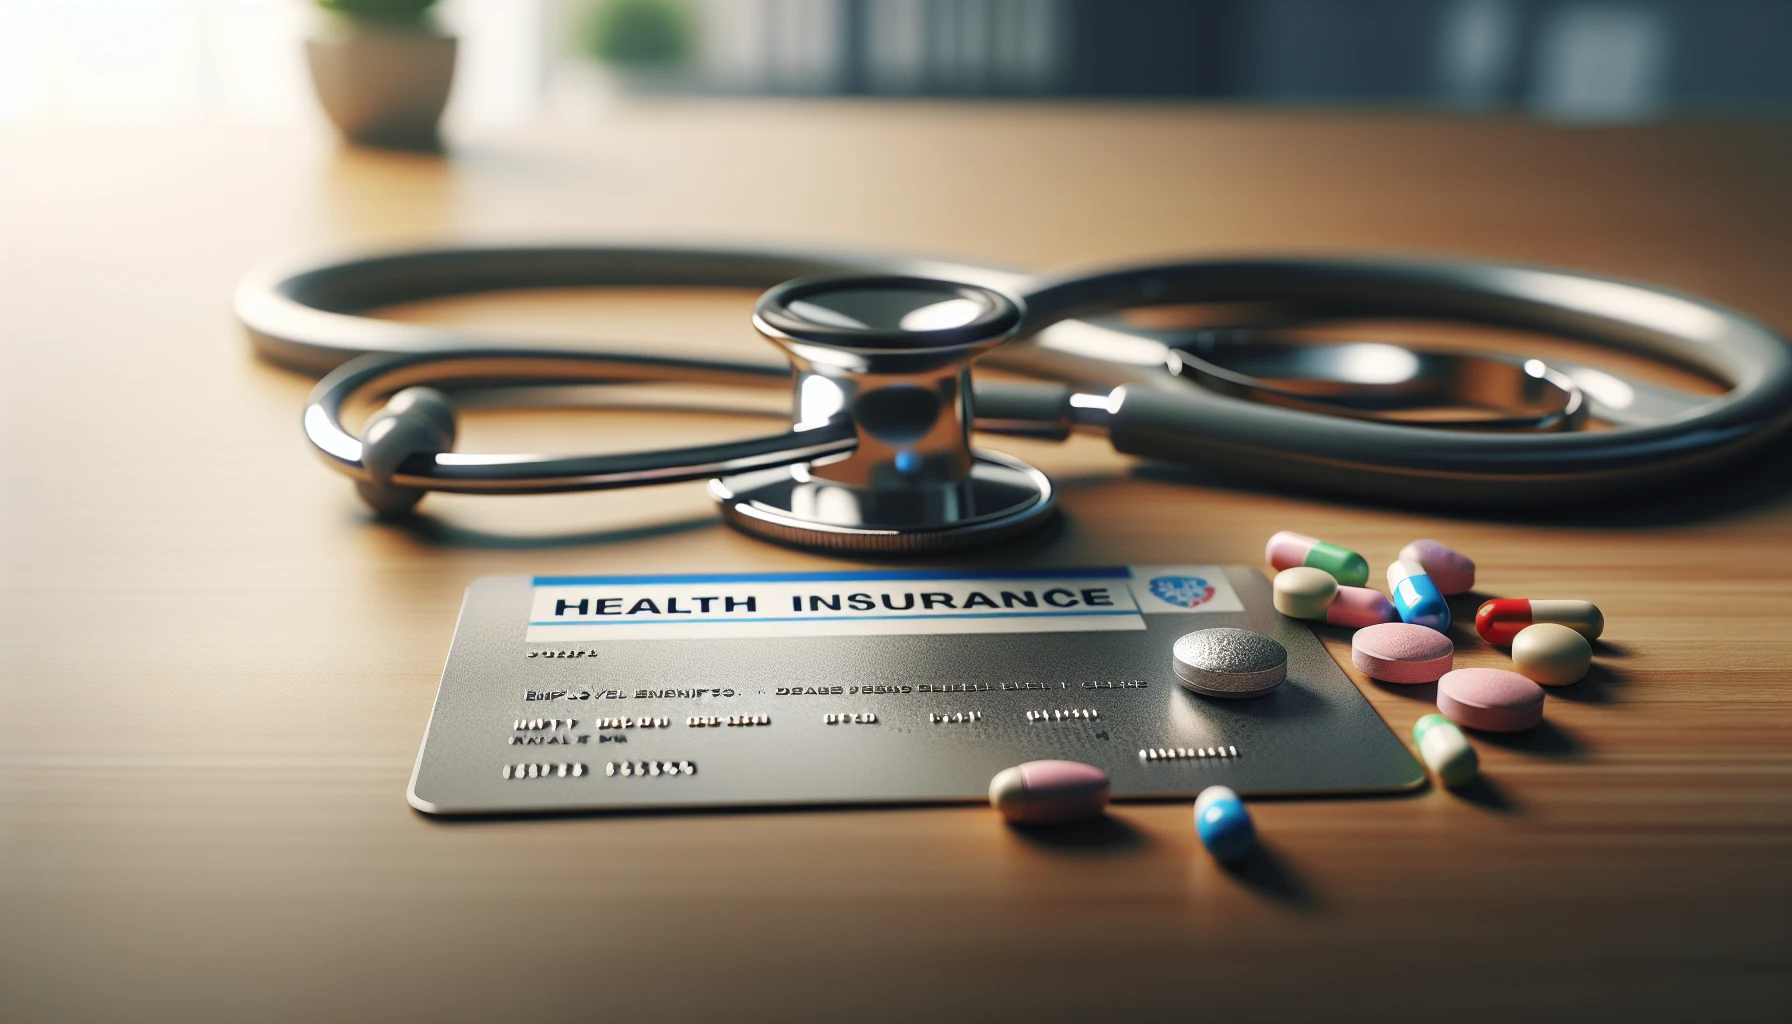 Health insurance card with stethoscope and pills